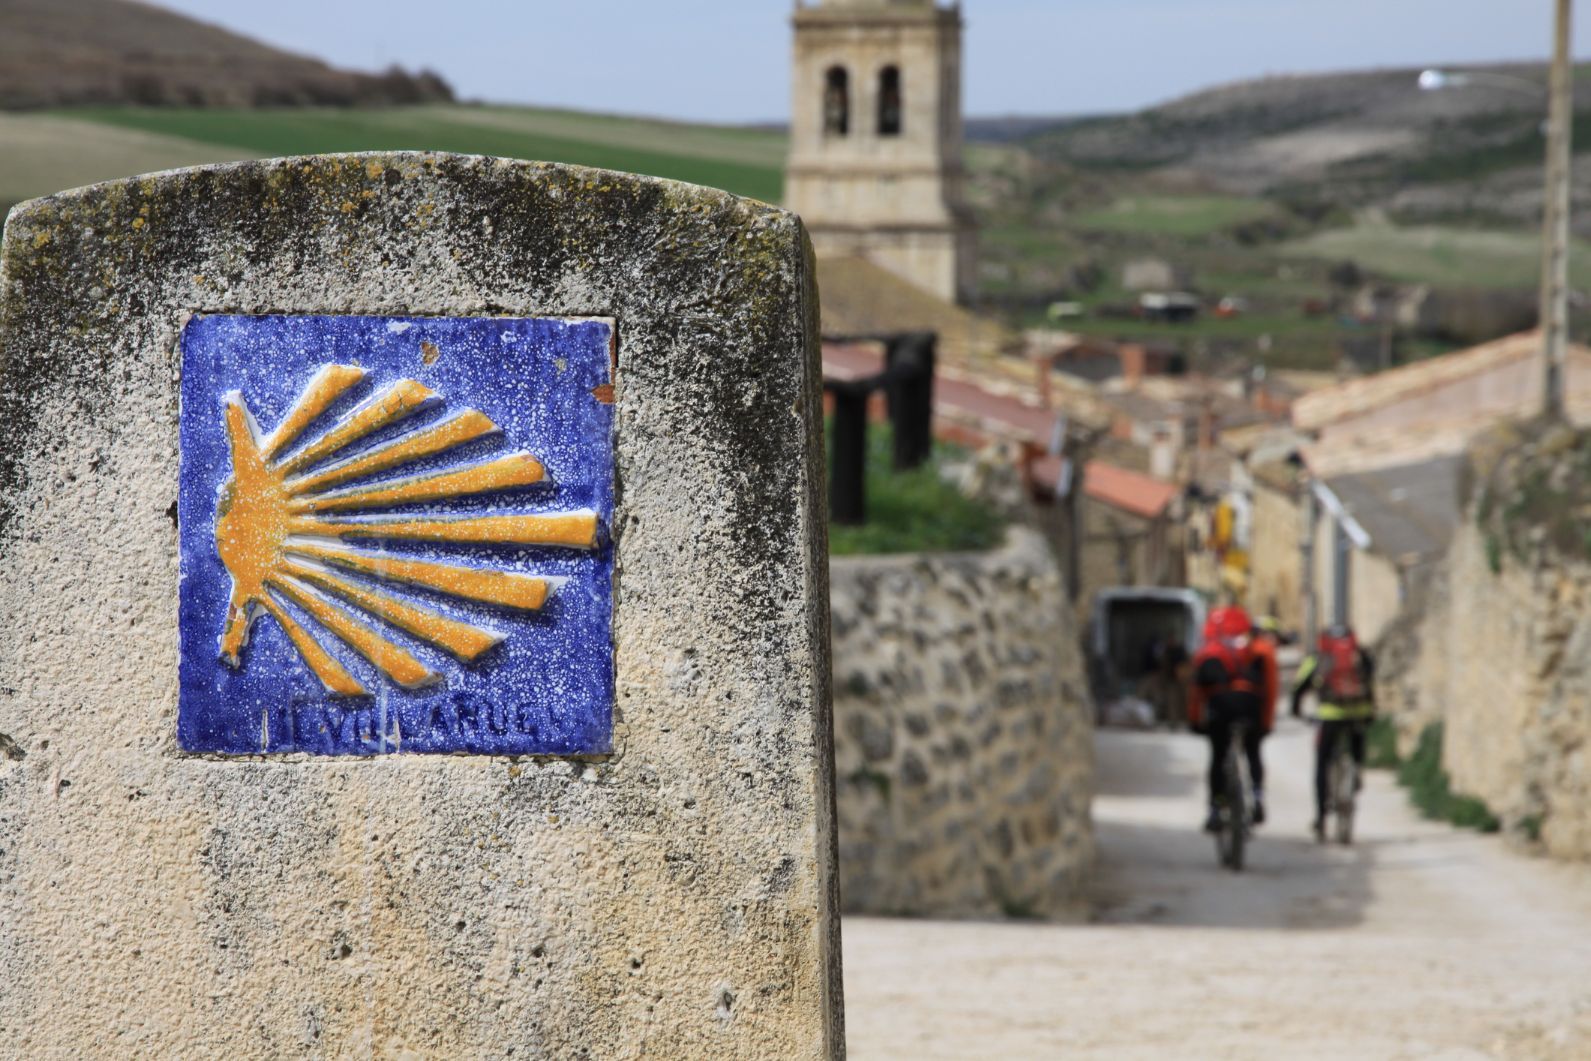 A Camino waymark in the foreground; hikers and a hill village in the background.